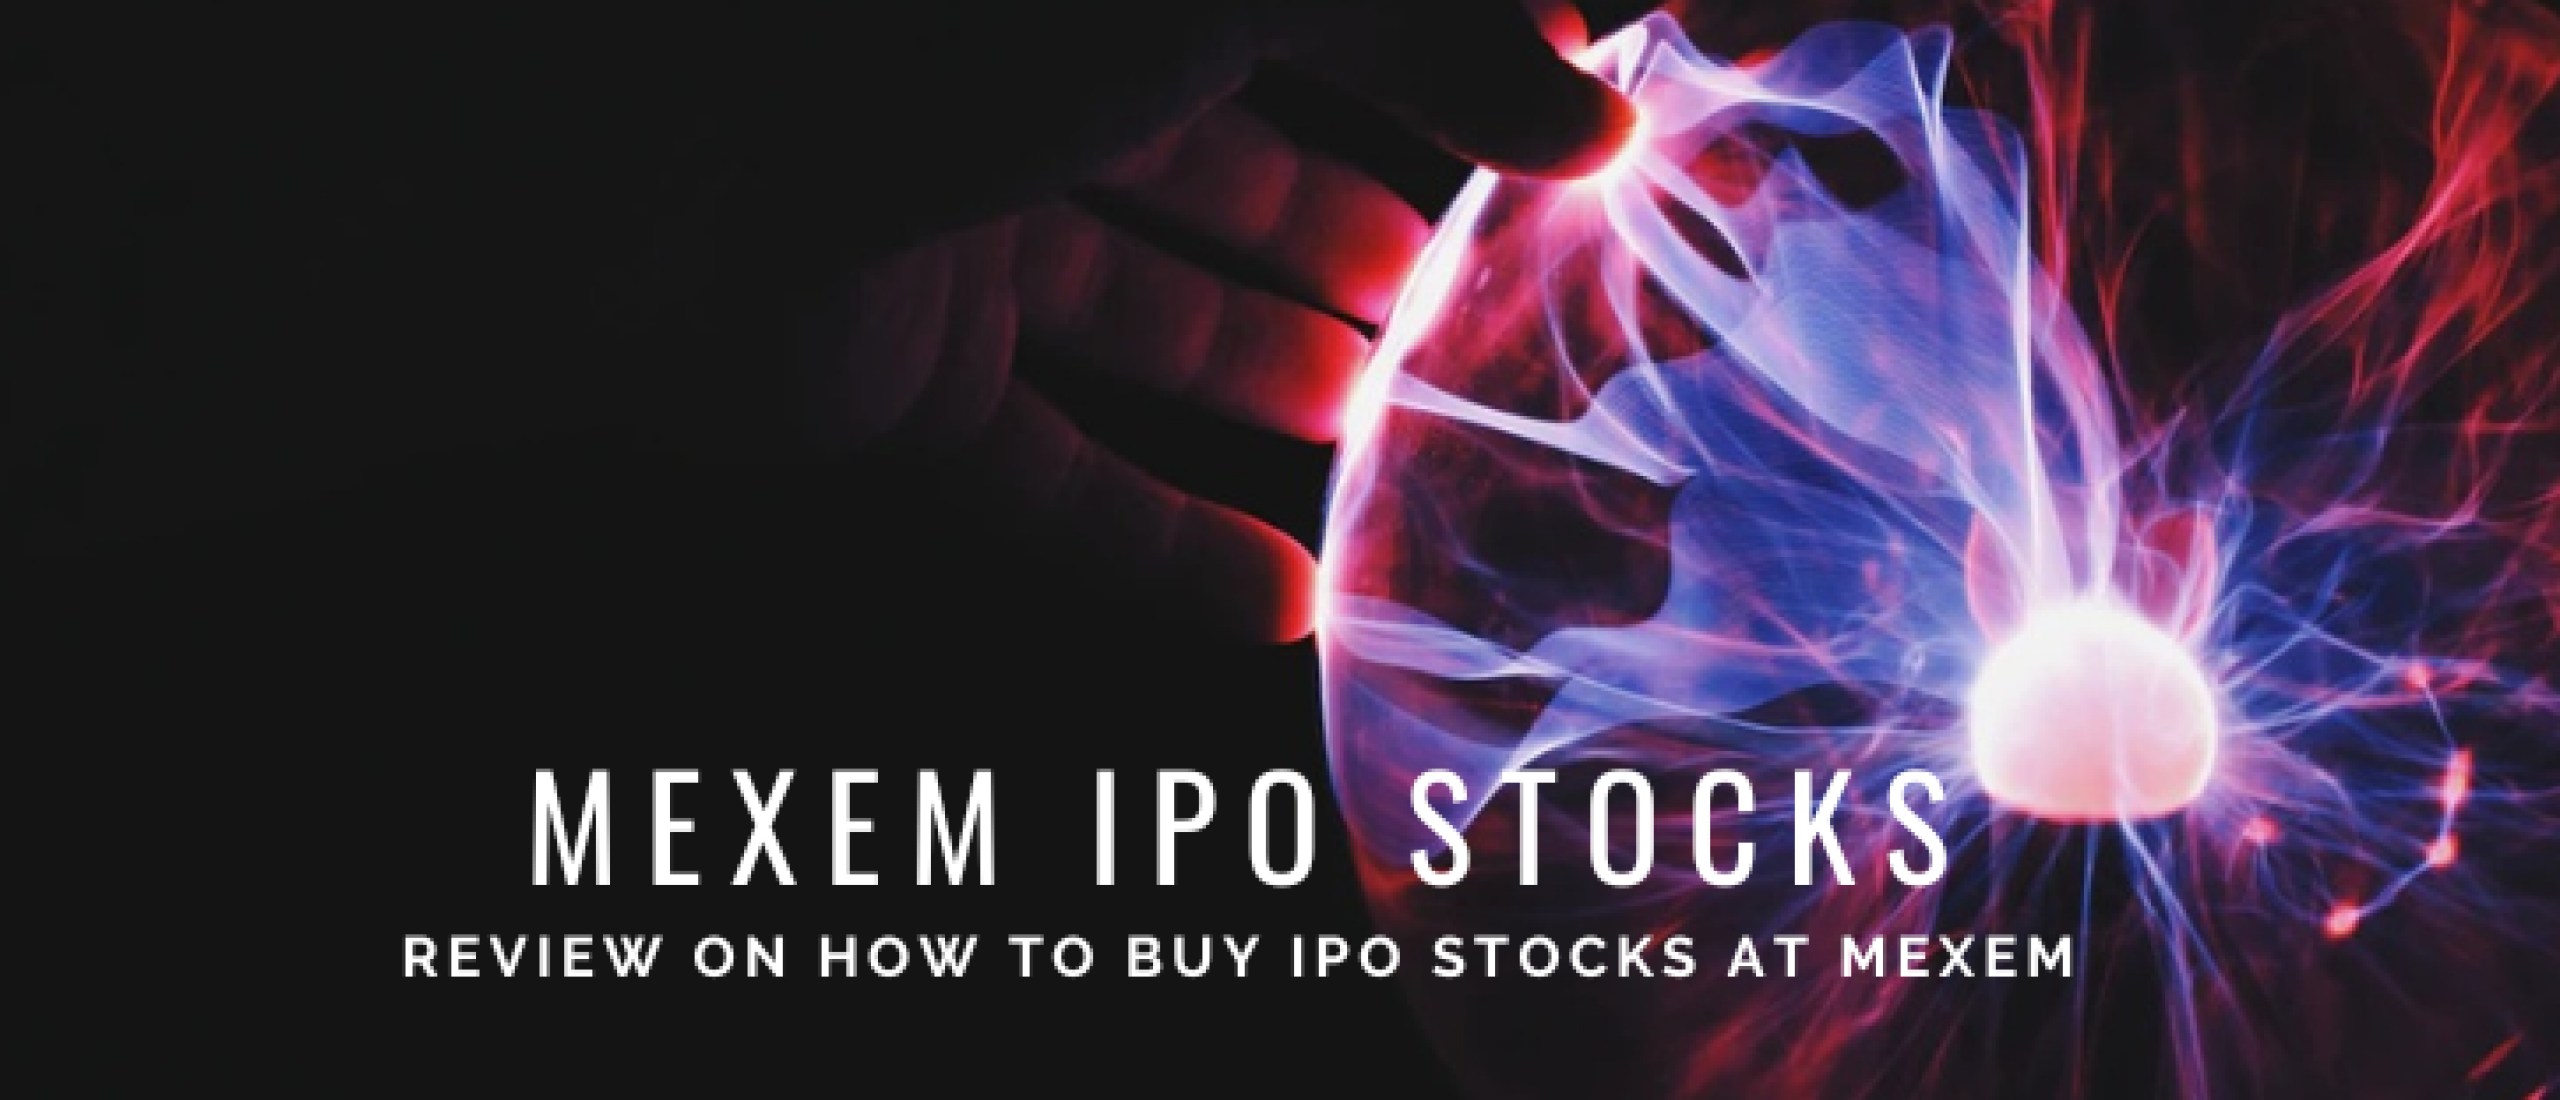 MEXEM IPO Stocks to Buy: Review with Pro’s and Con’s | Happy Investors